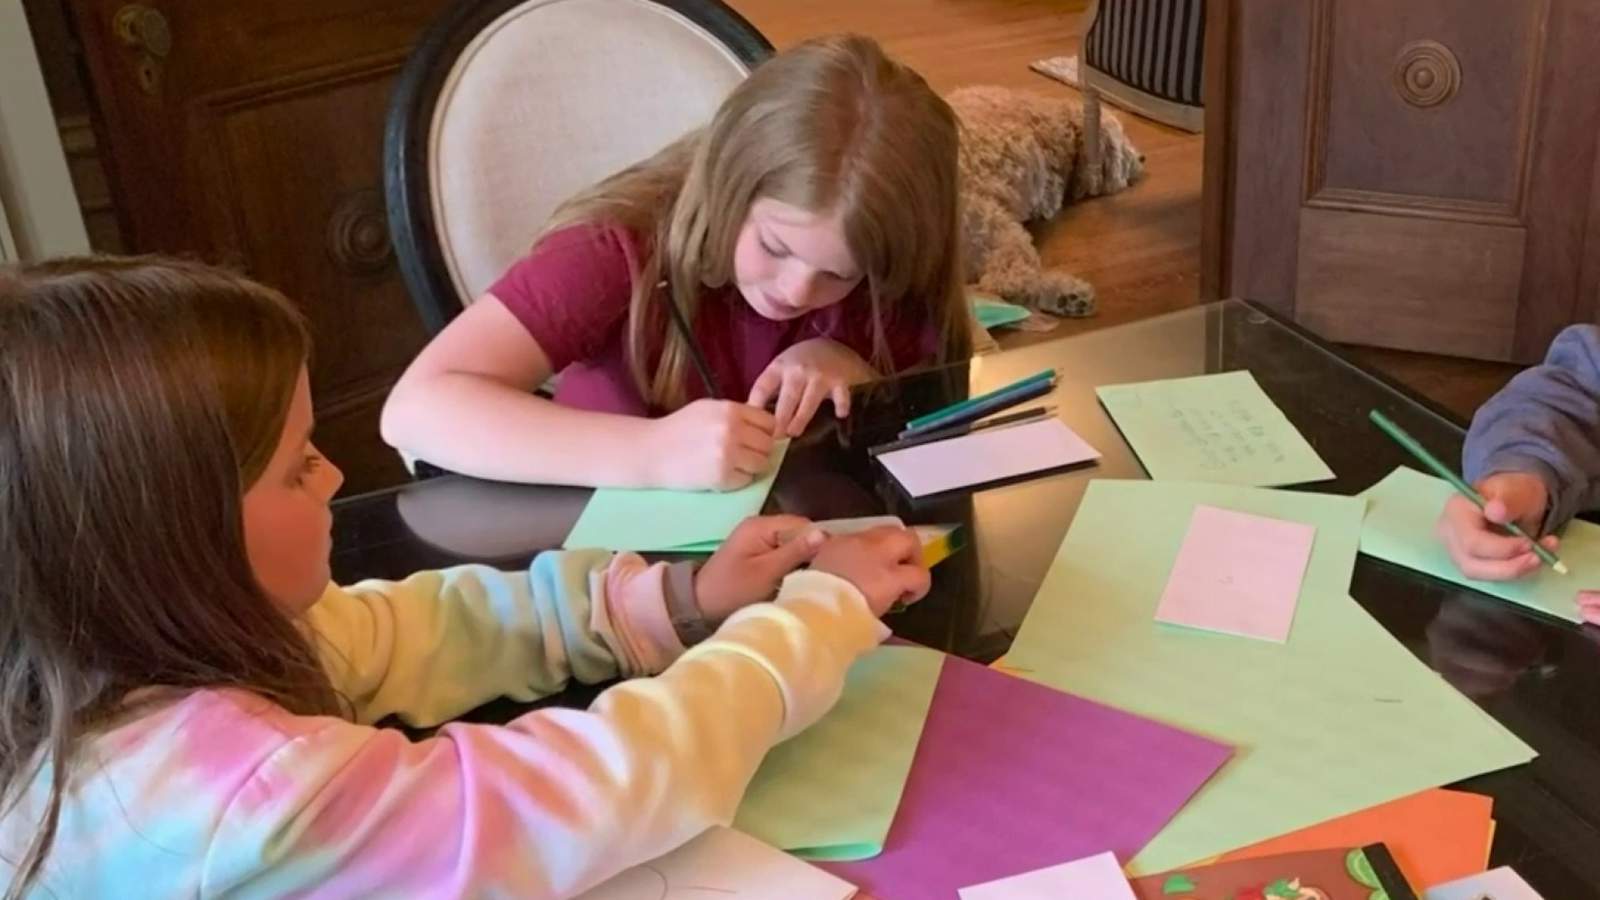 How to teach your children etiquette, manners while stuck at home